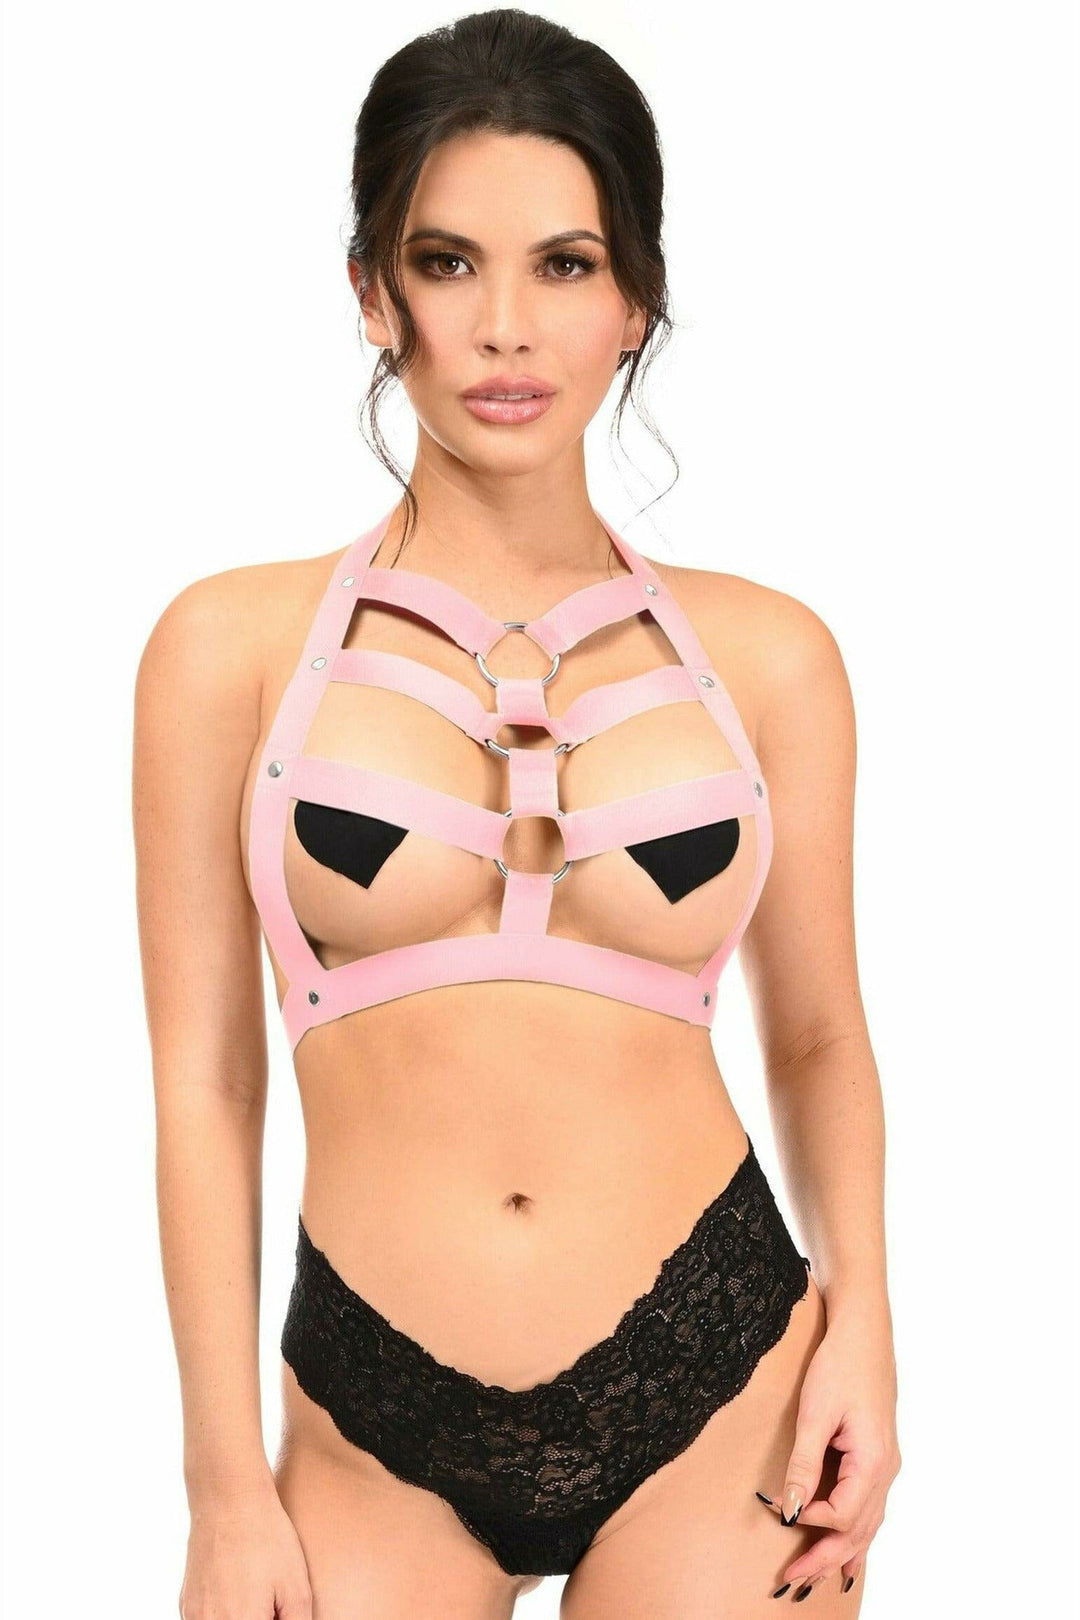 Lt Pink Stretchy Body Harness W/Silver Hardware